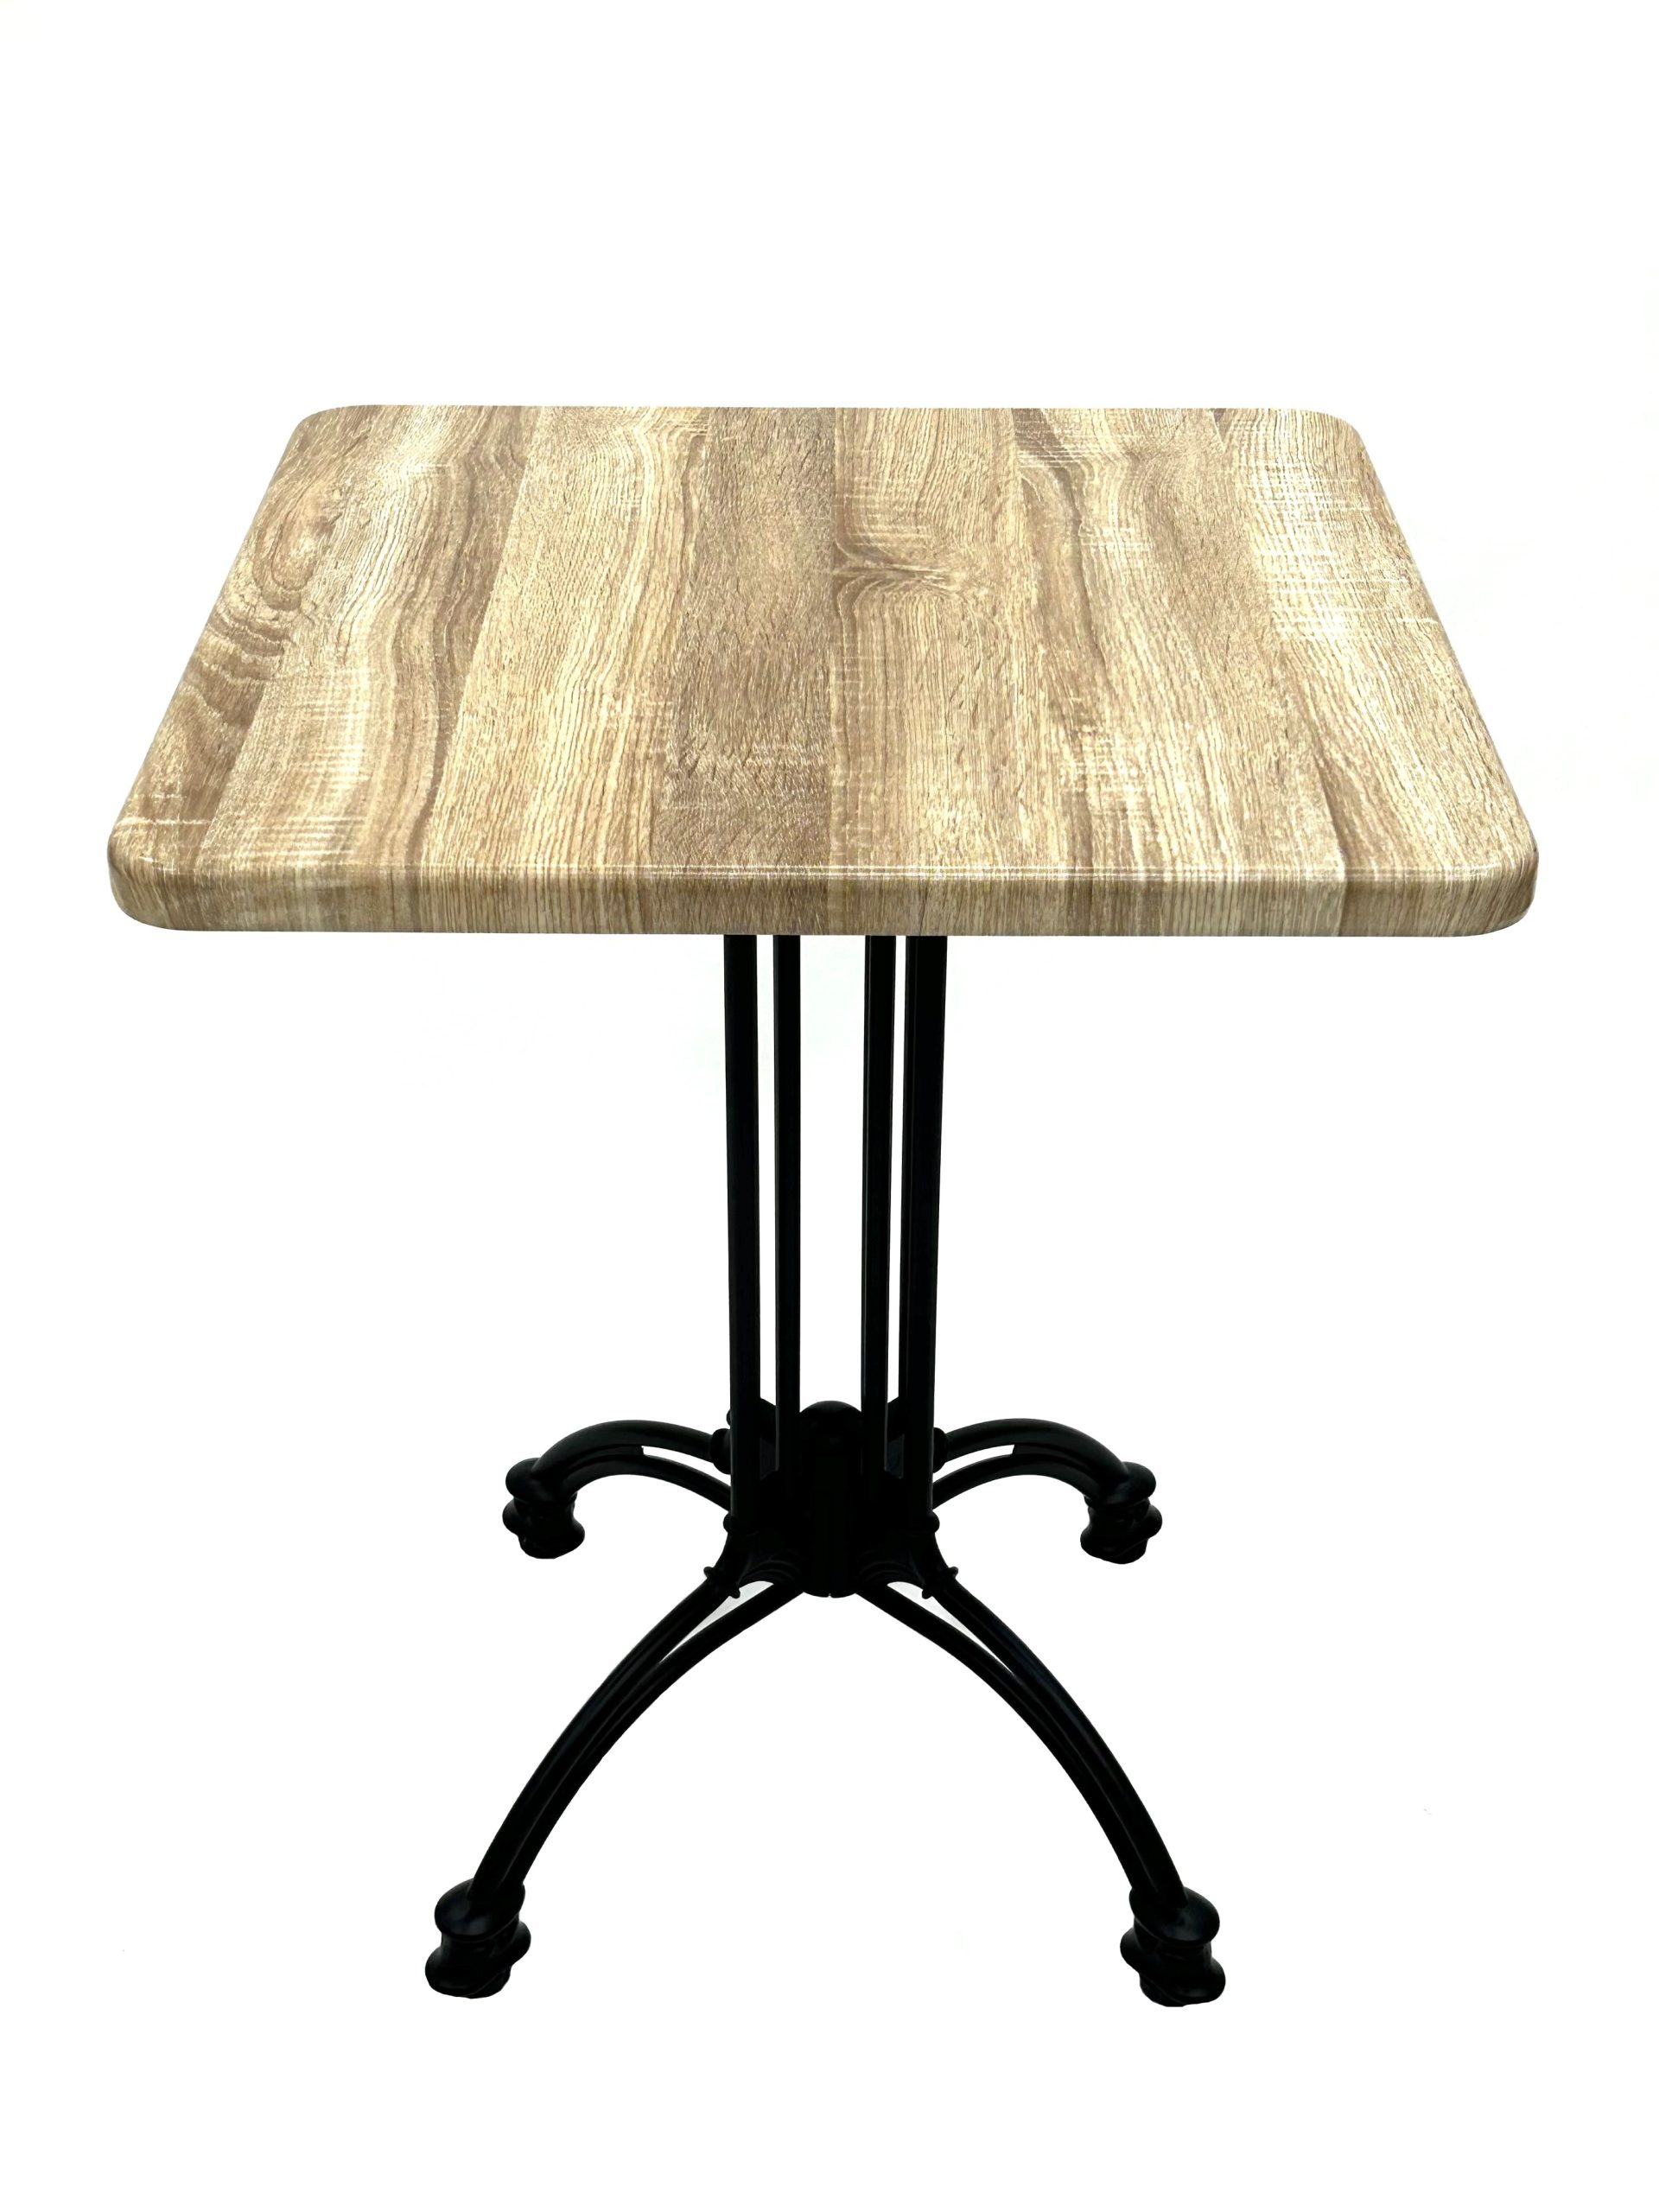 Distributors Of High Quality Monza Bistro Tables